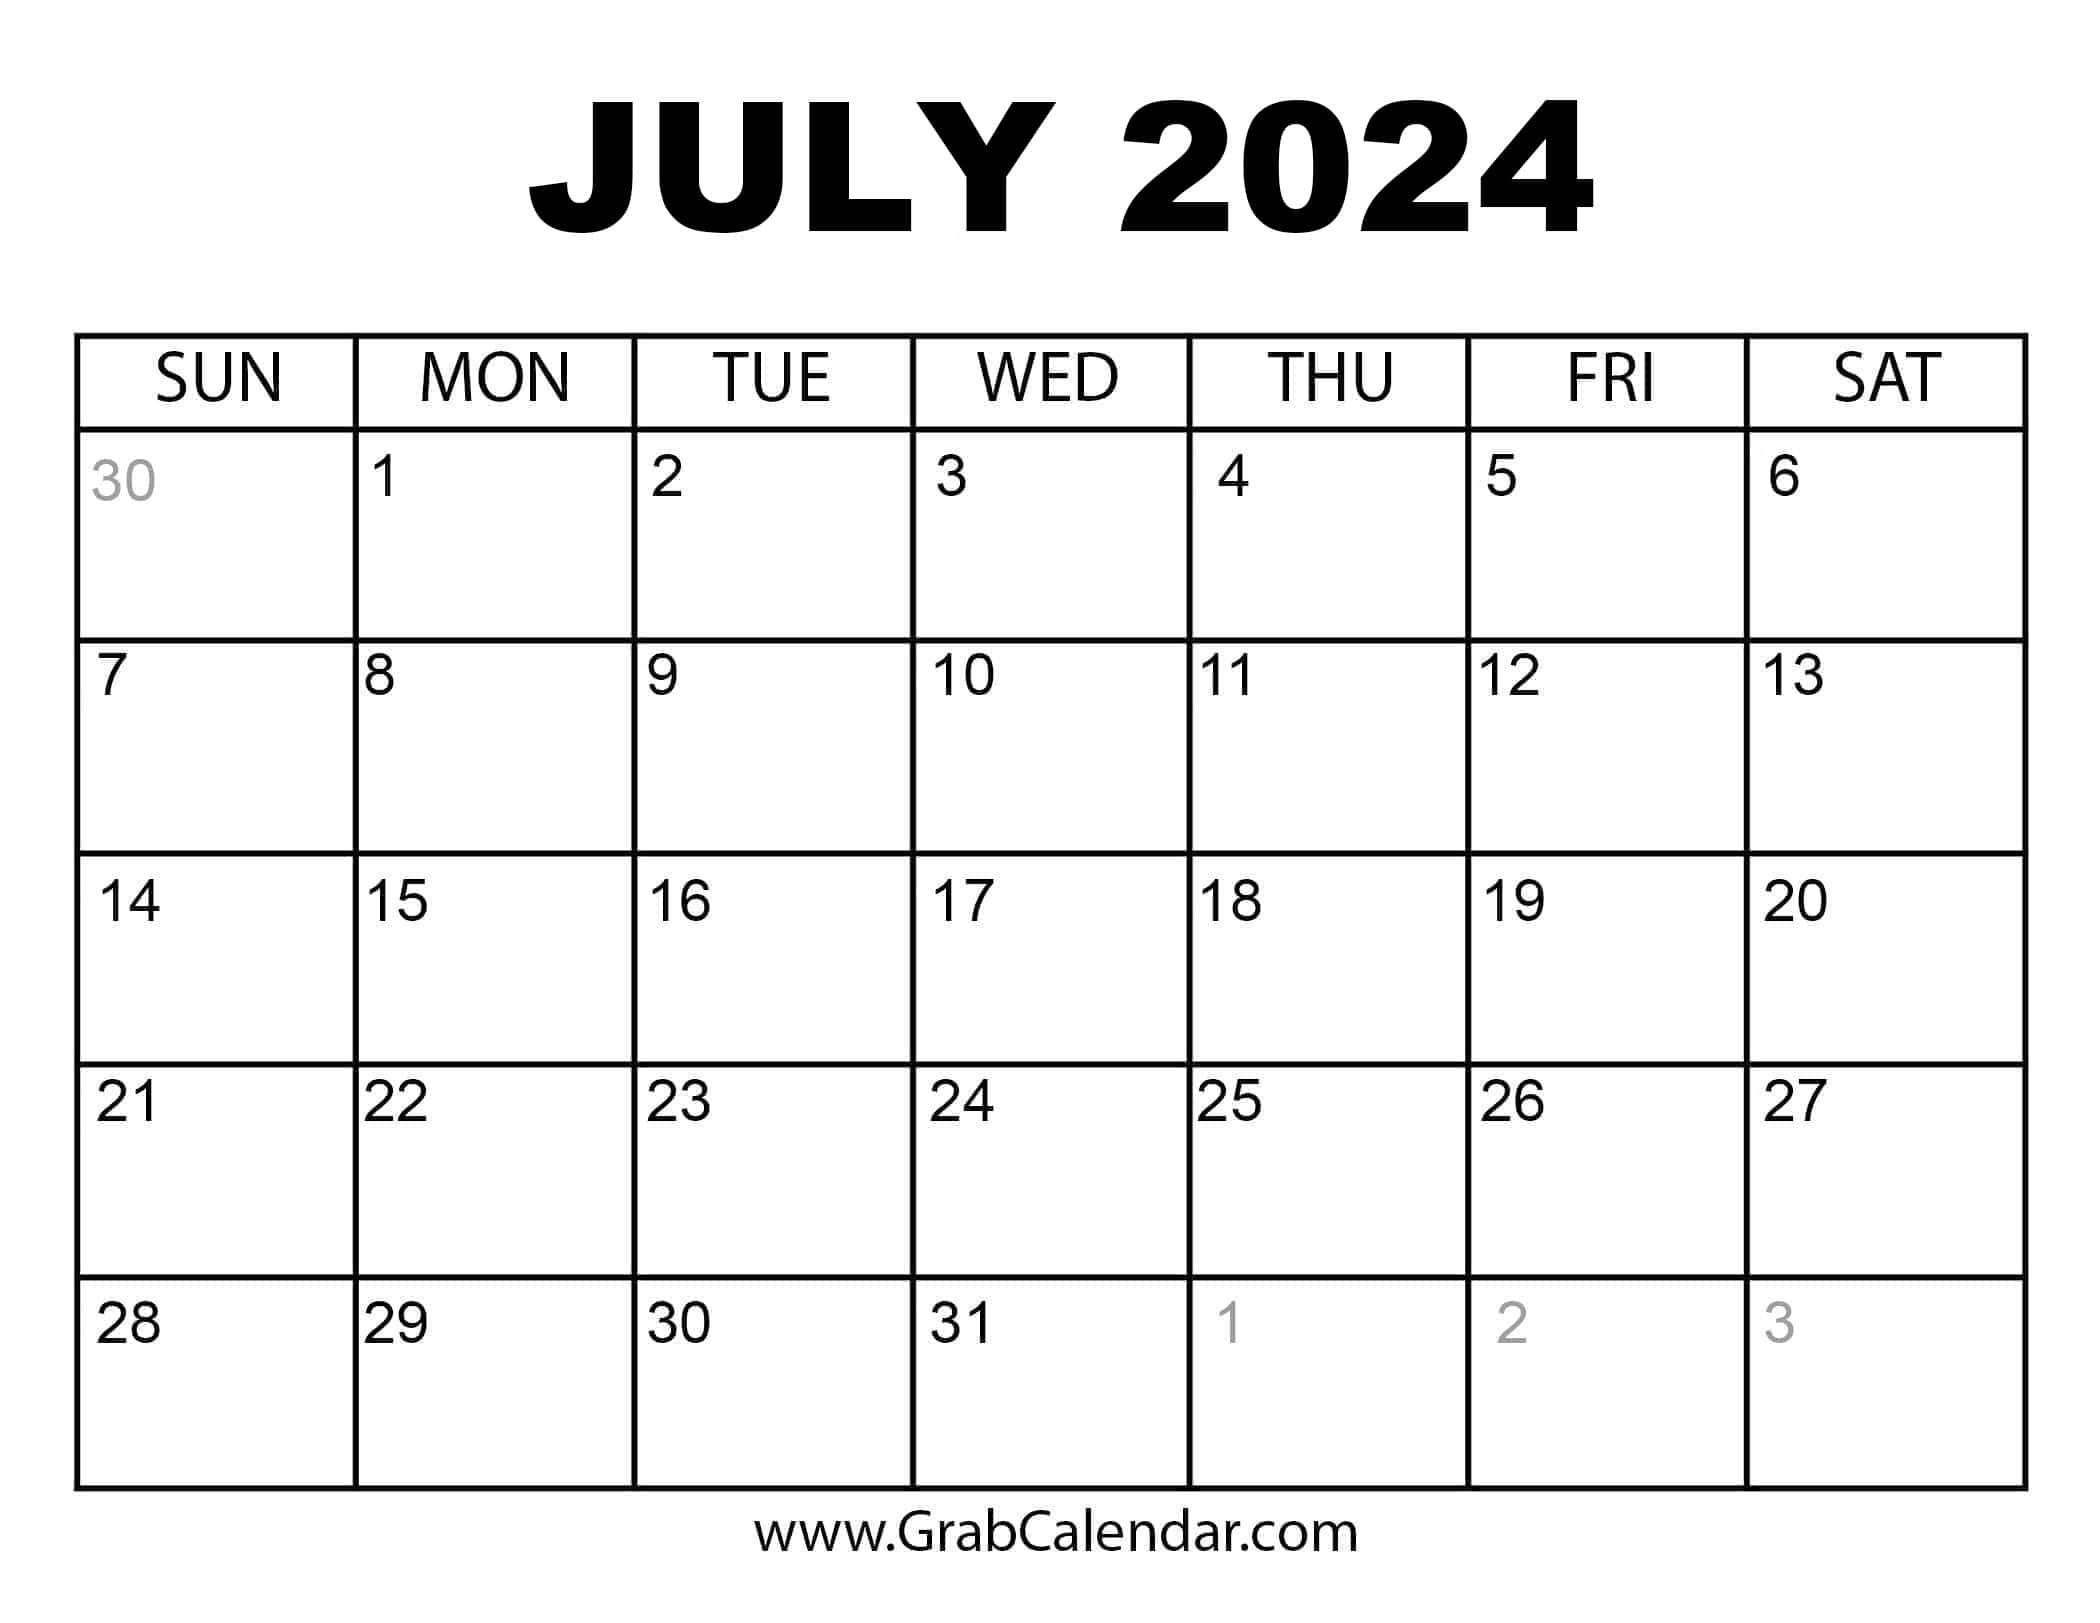 Printable July 2024 Calendar | Show Me The Calendar Of The Month Of July 2024